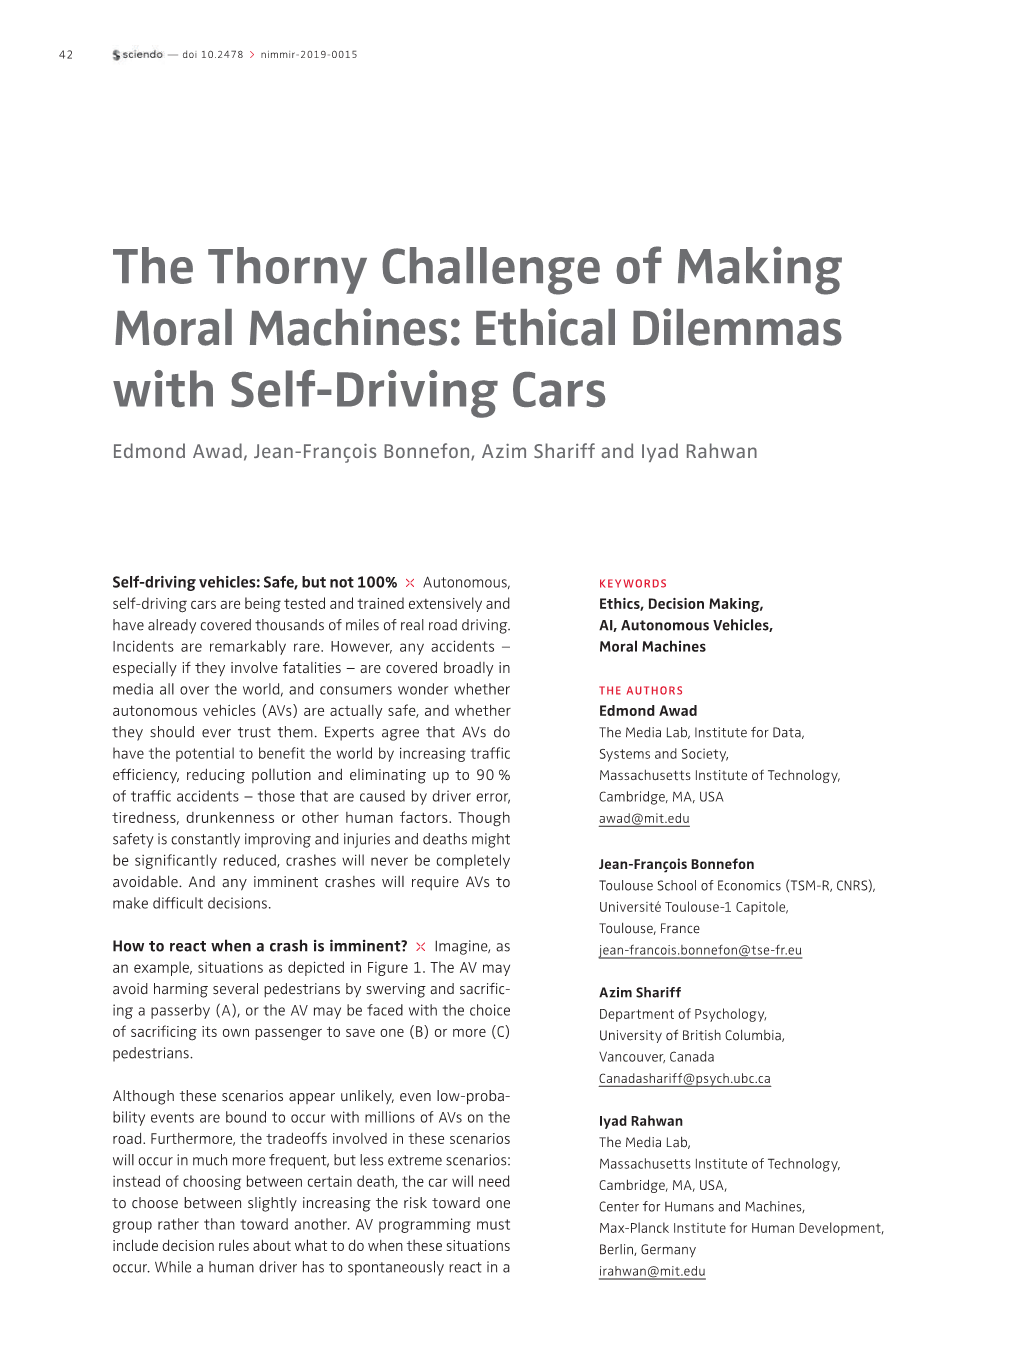 Ethical Dilemmas with Self-Driving Cars